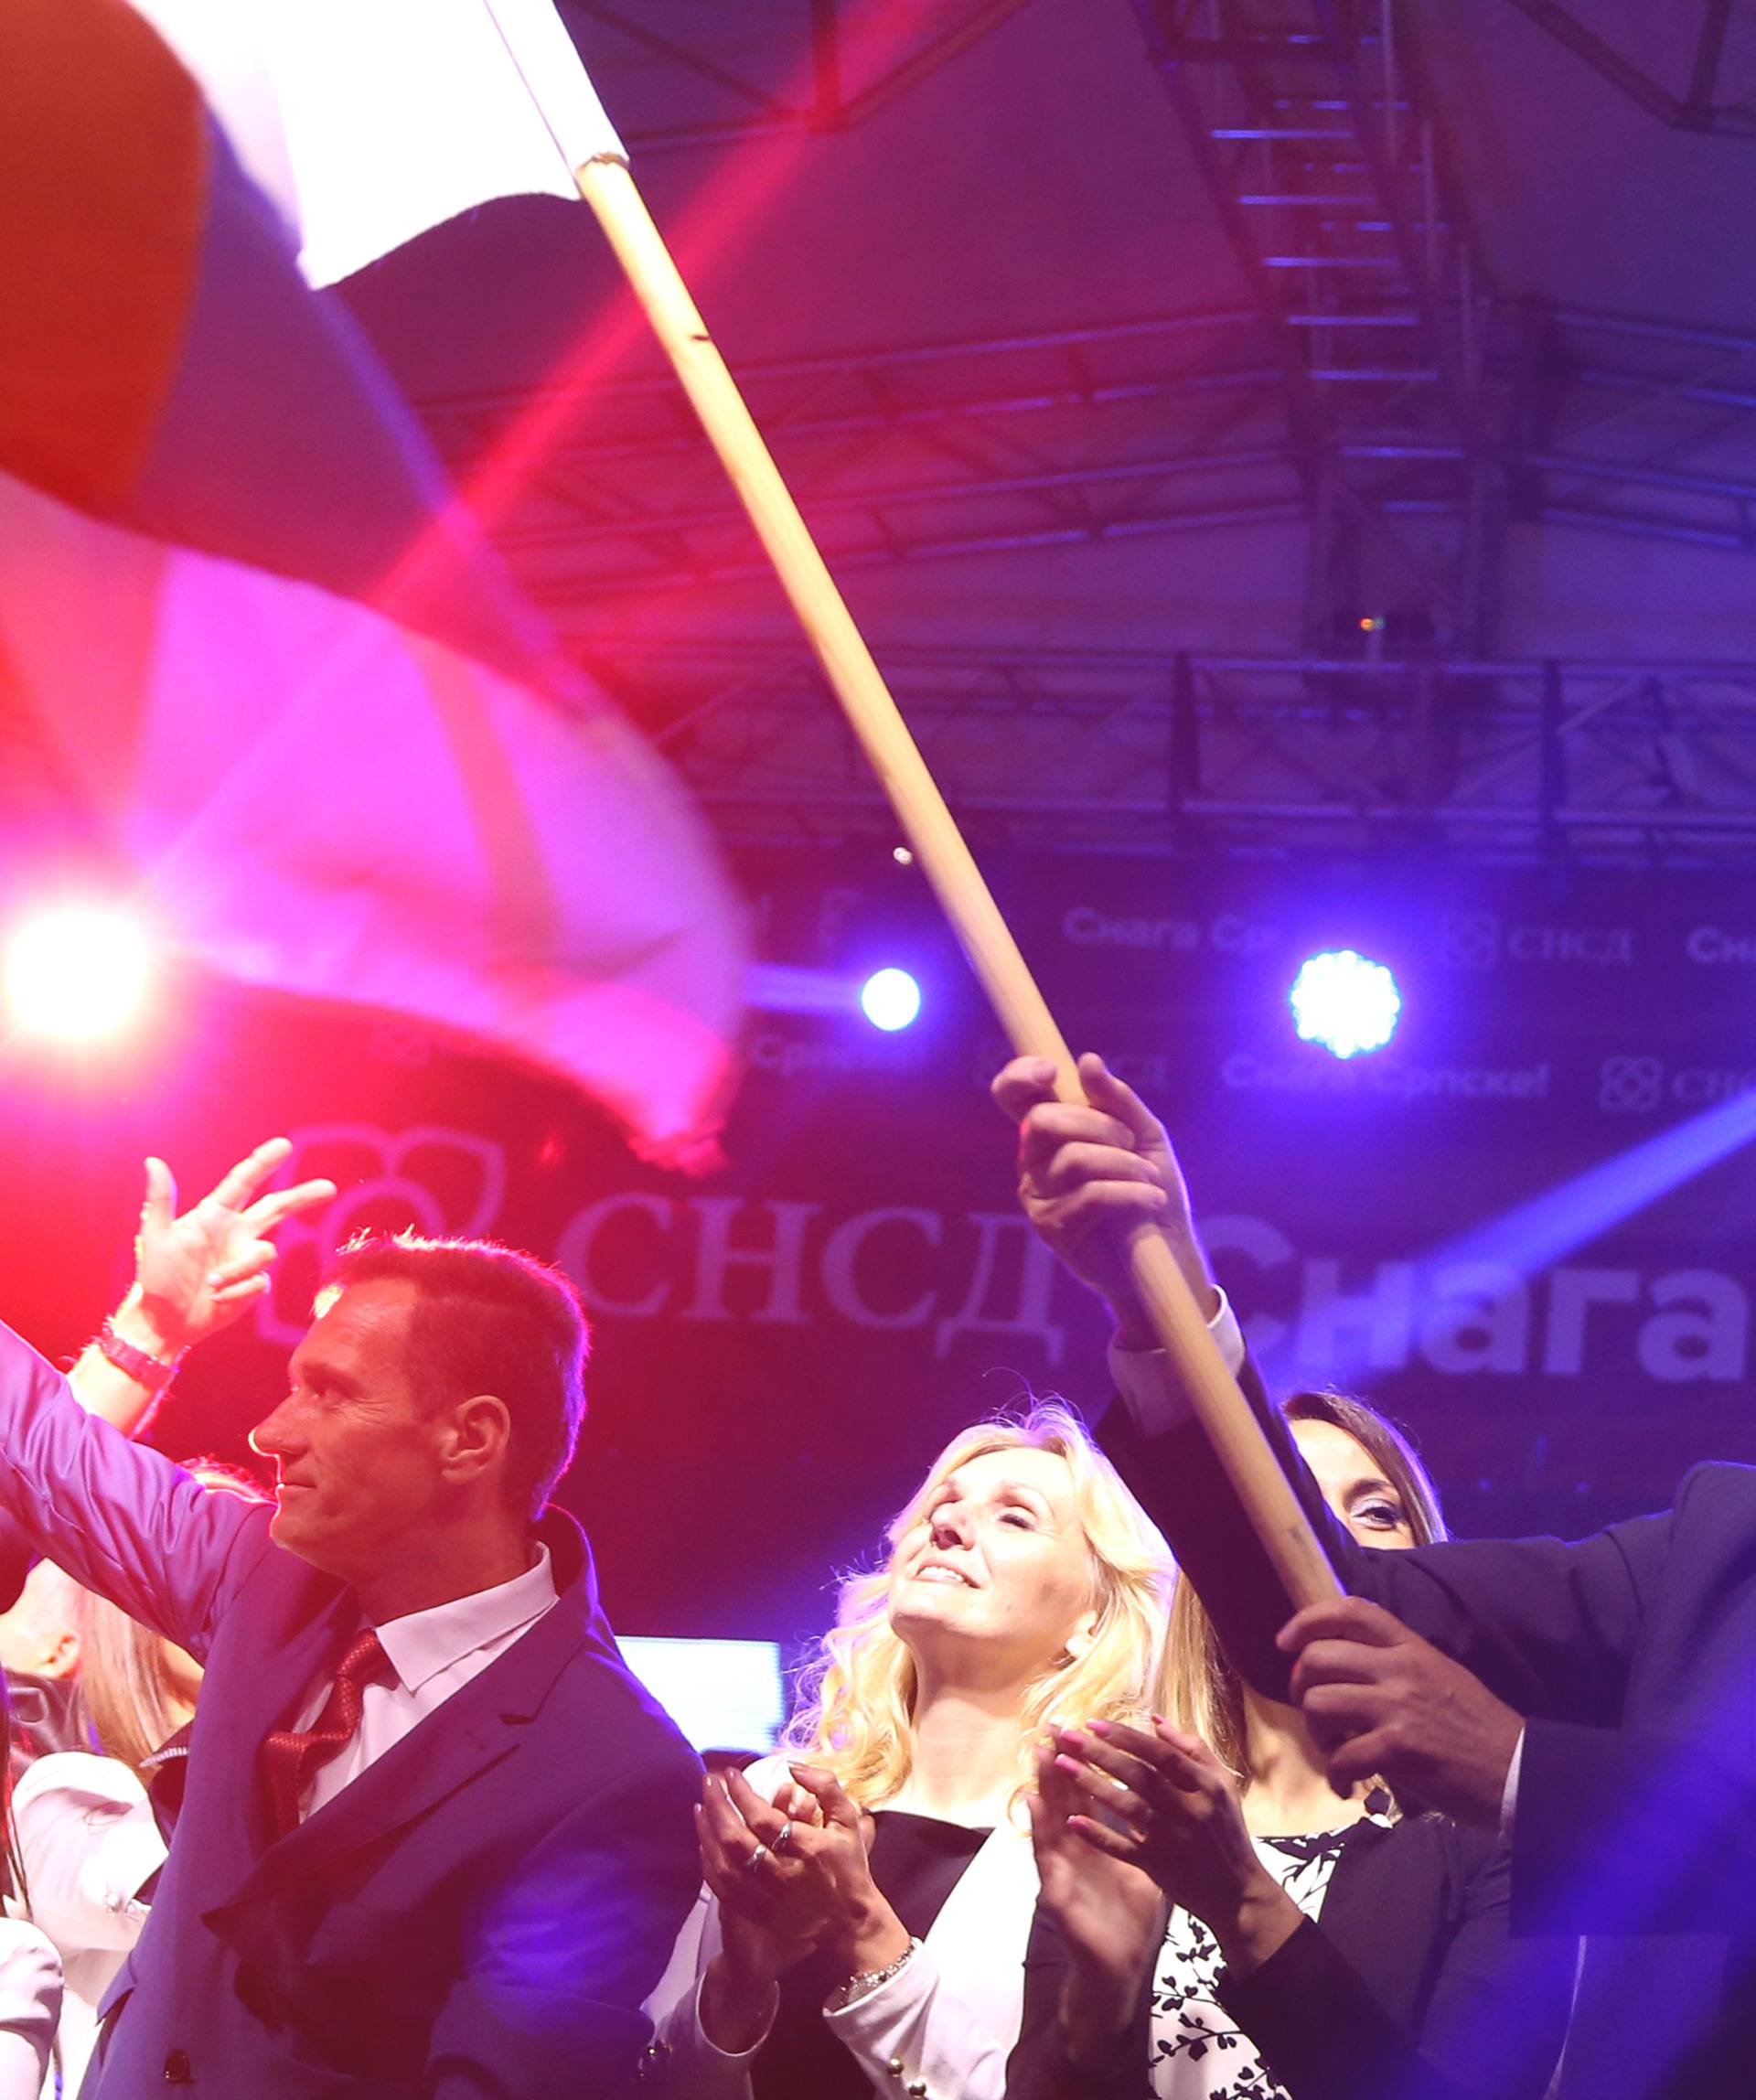 Milorad Dodik, President of Republika Srpska, celebrates the results of a referendum over a disputed national holiday during an election rally in Pale